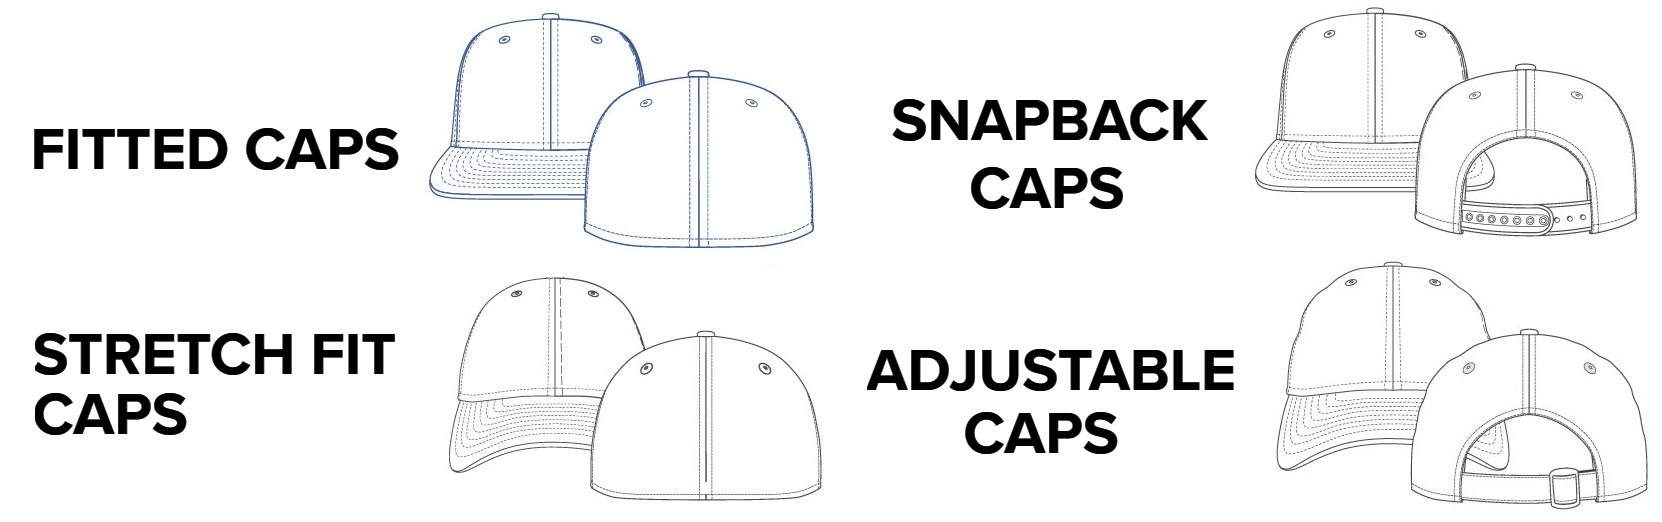 cap style guide